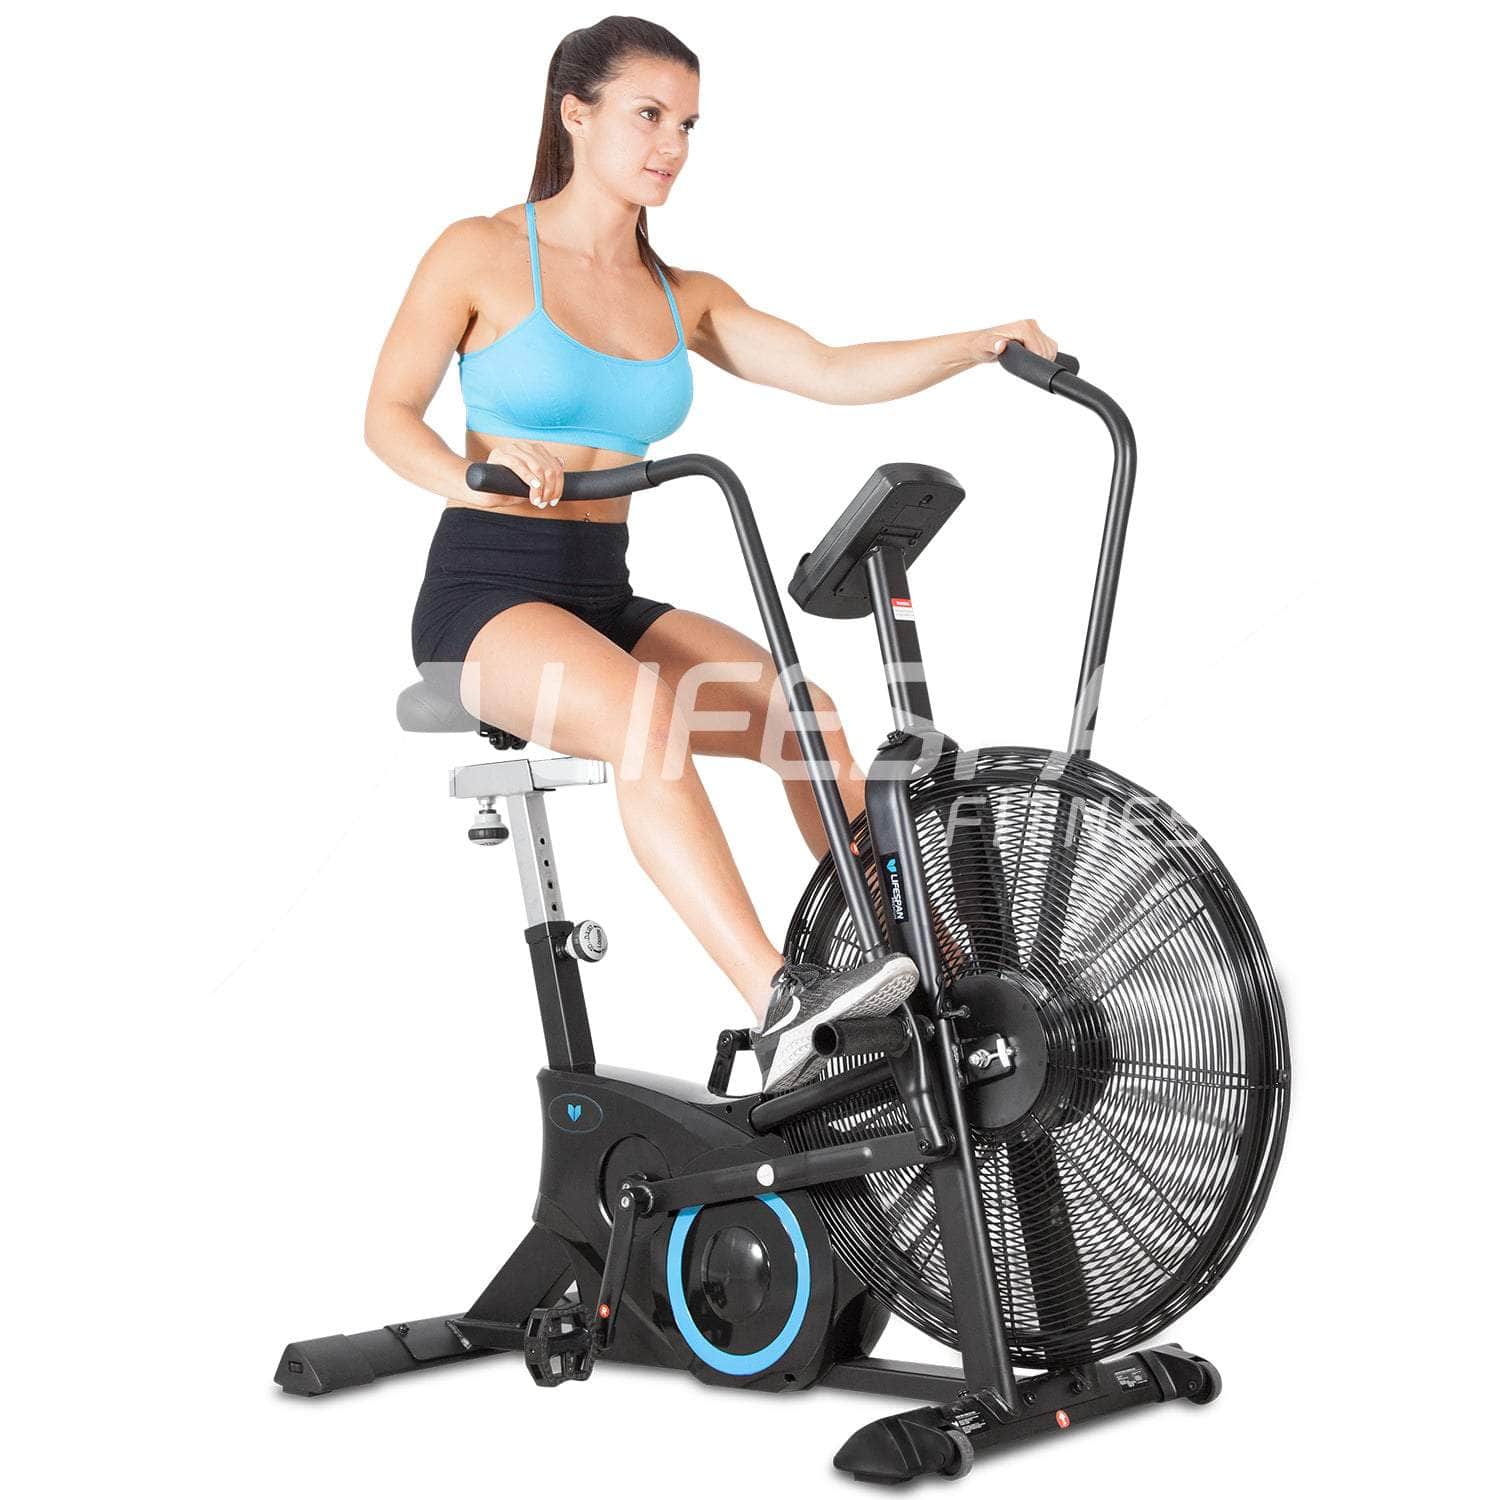 EXER-90H Exercise Bike Delivers Results